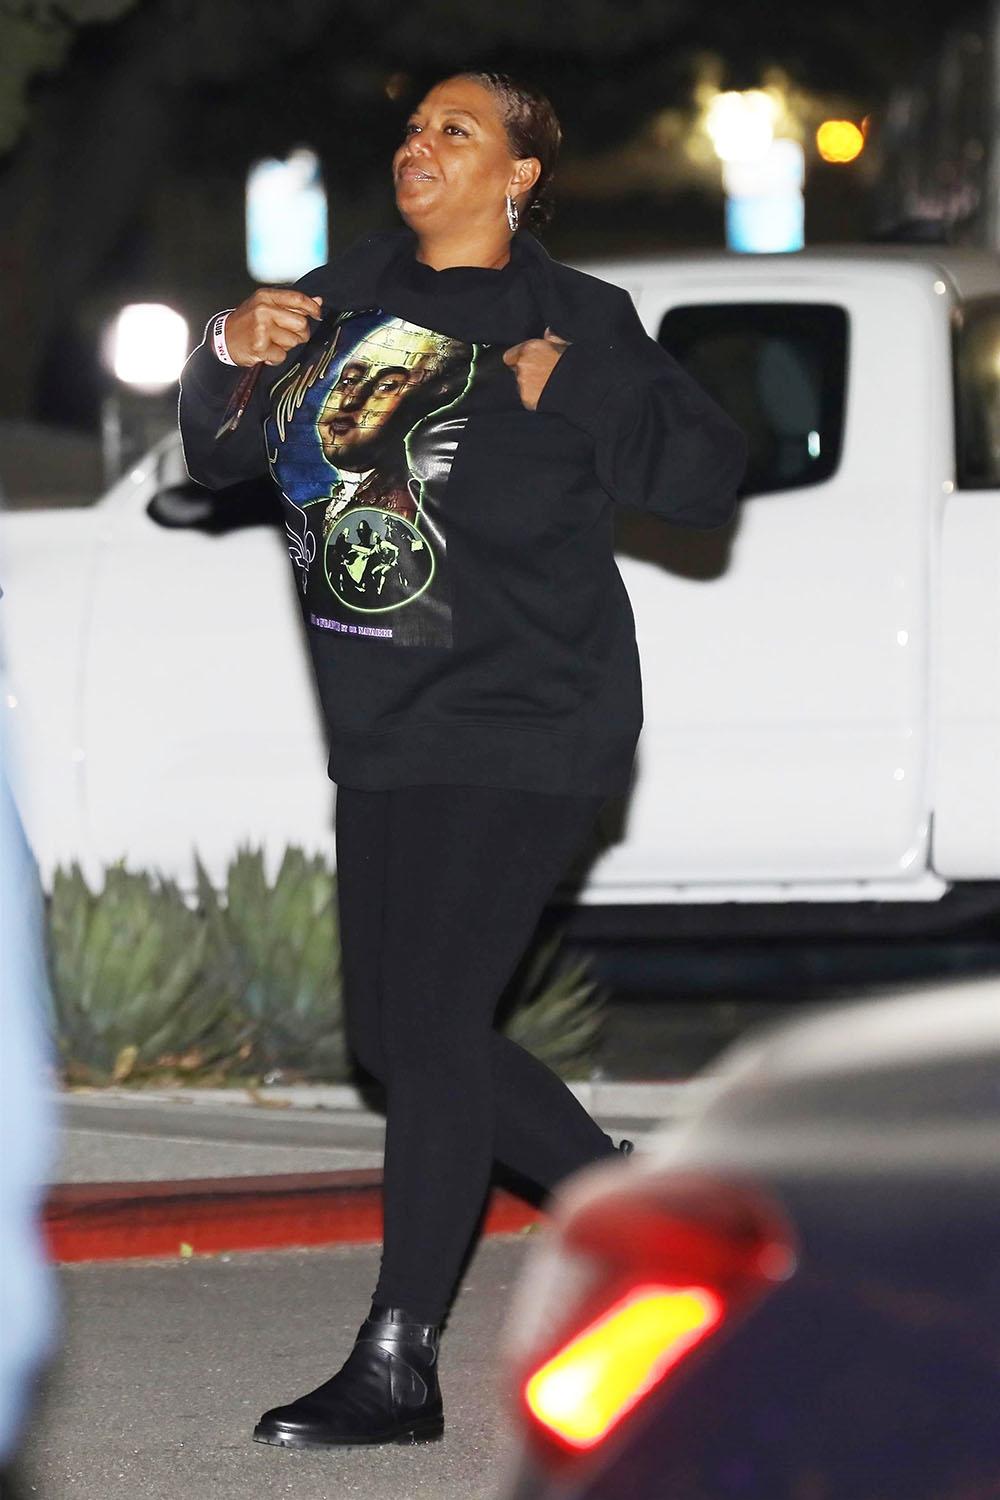 Queen Latifah and girlfriend Eboni attend Jay-Z's concert at The Forum